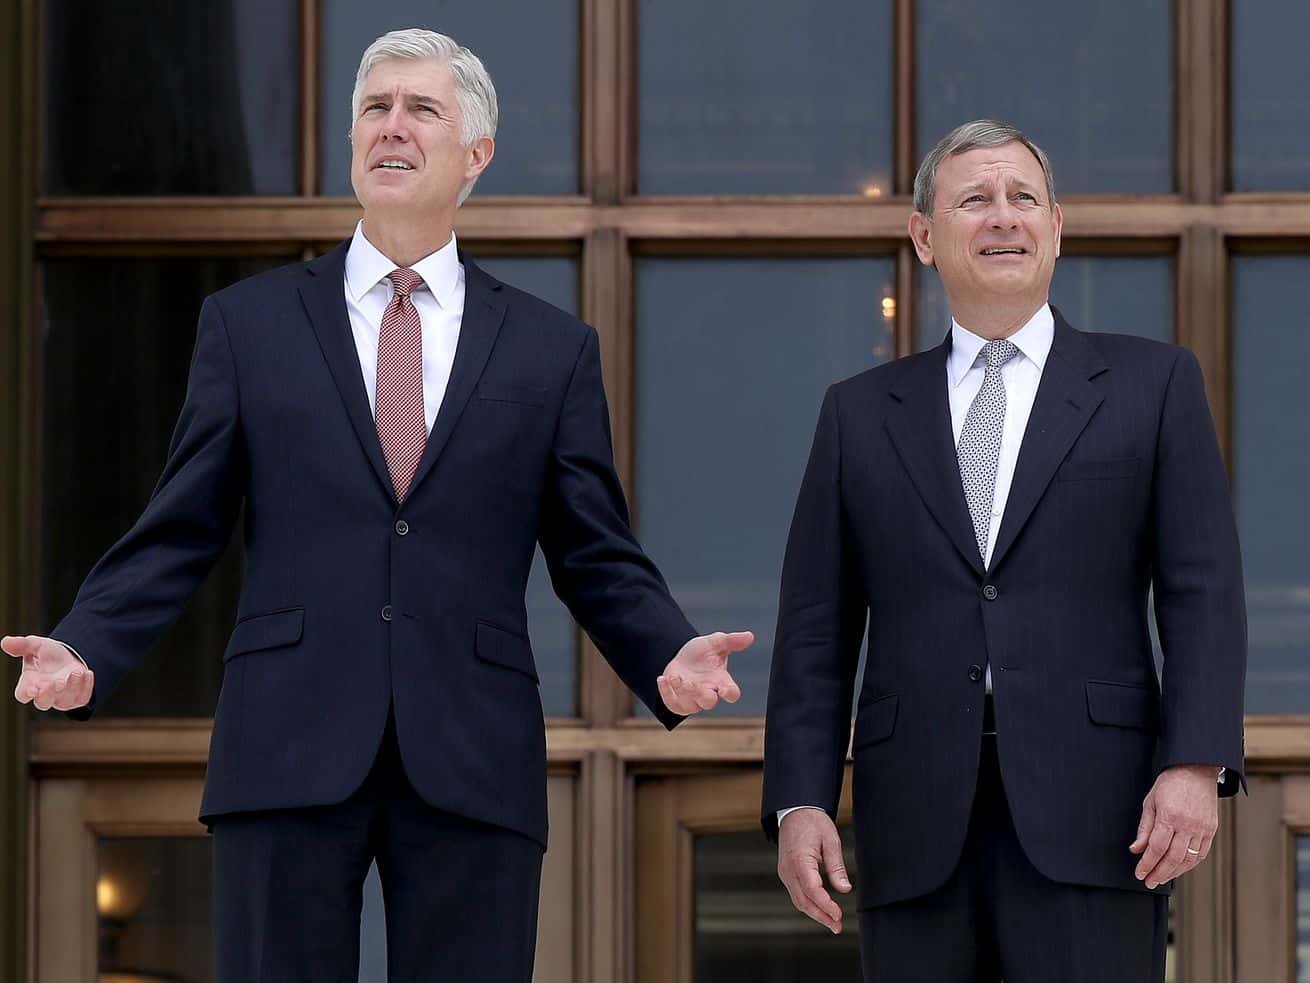 An epic Supreme Court showdown over religion and LGBTQ rights ends in a whimper